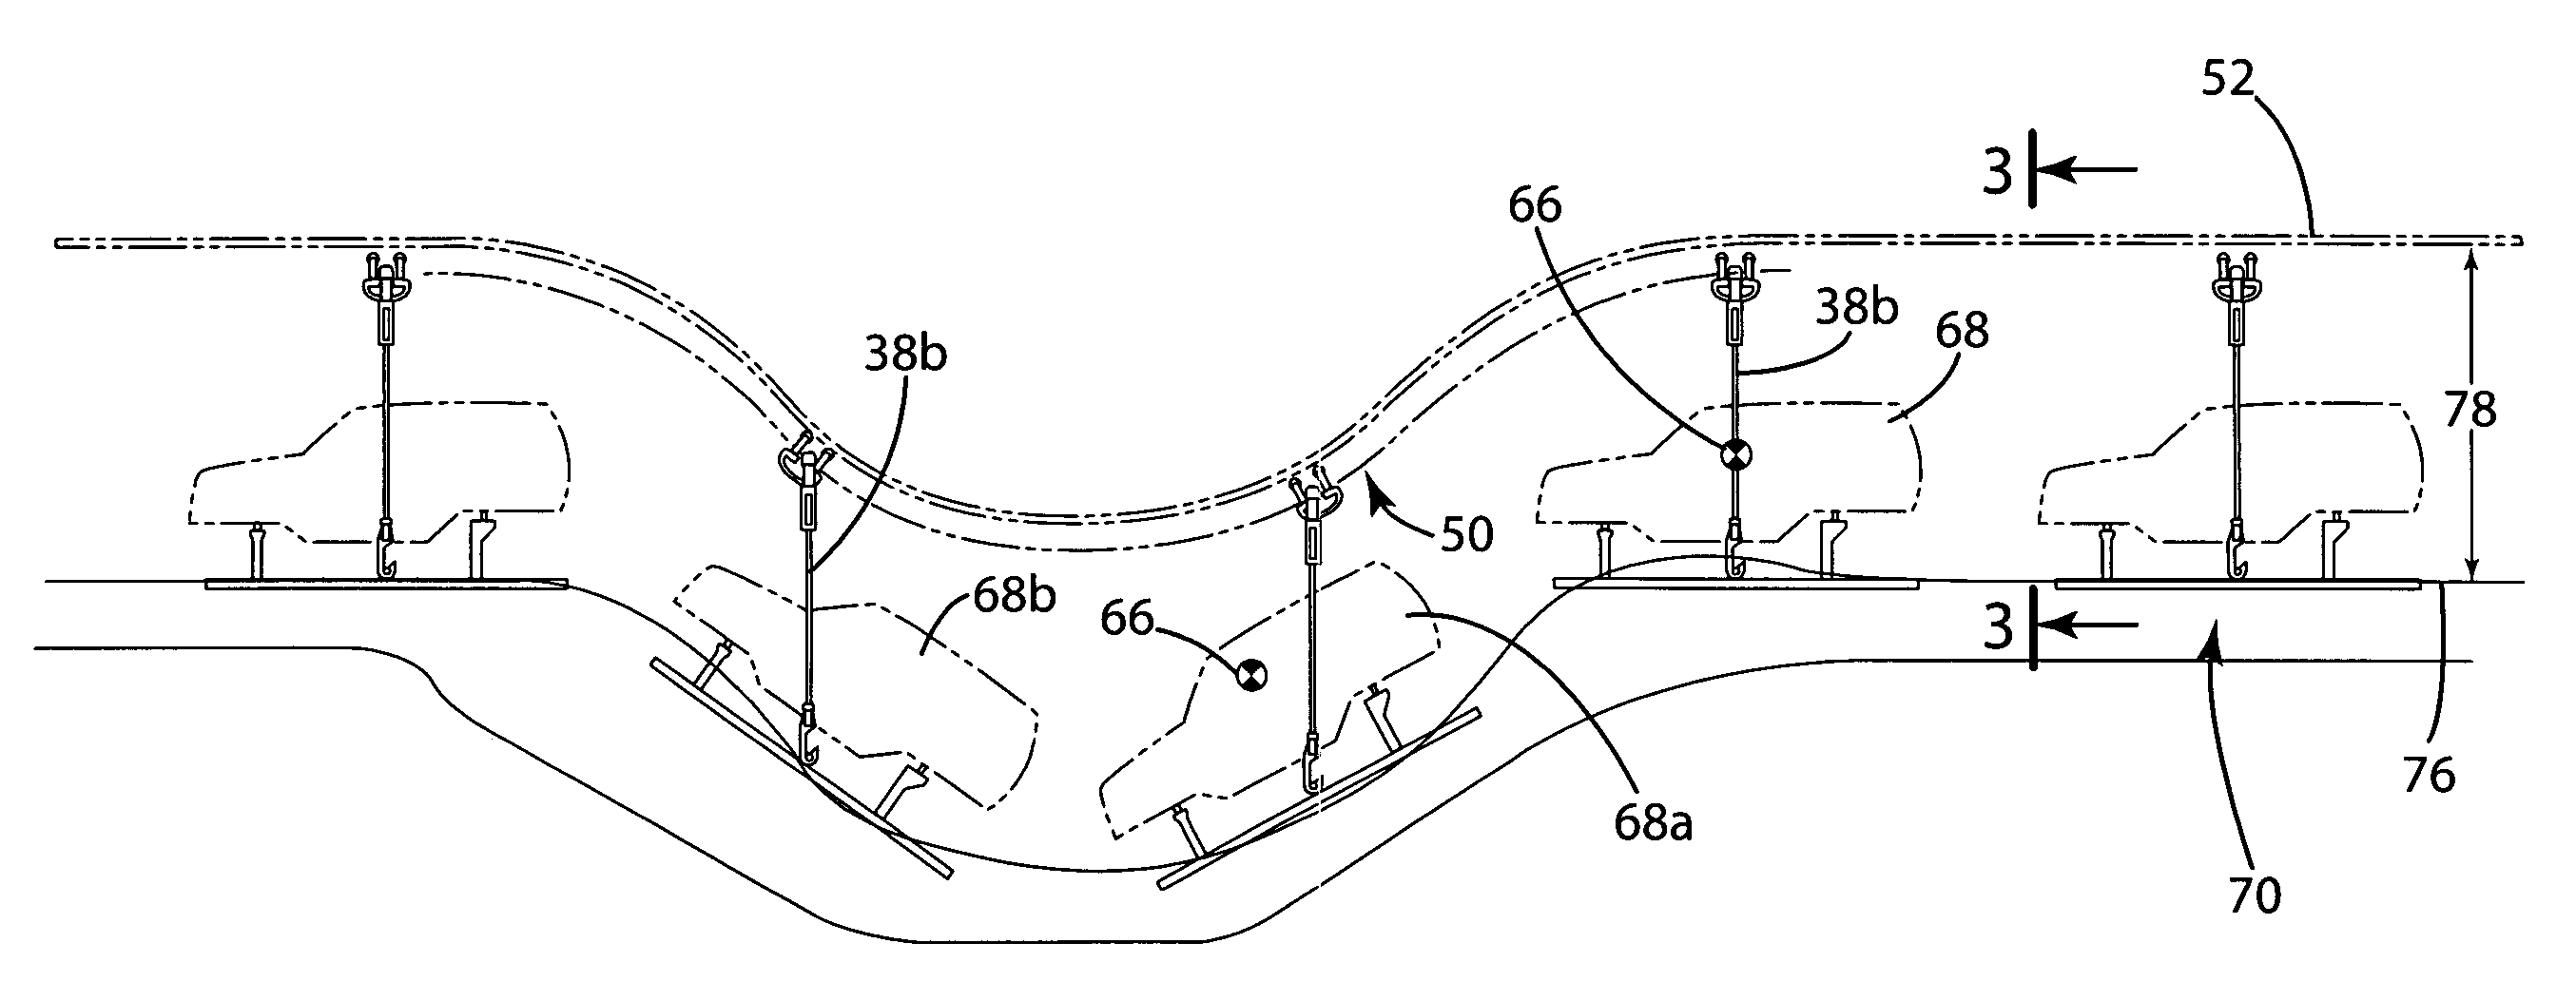 Conveyor system for article treatment